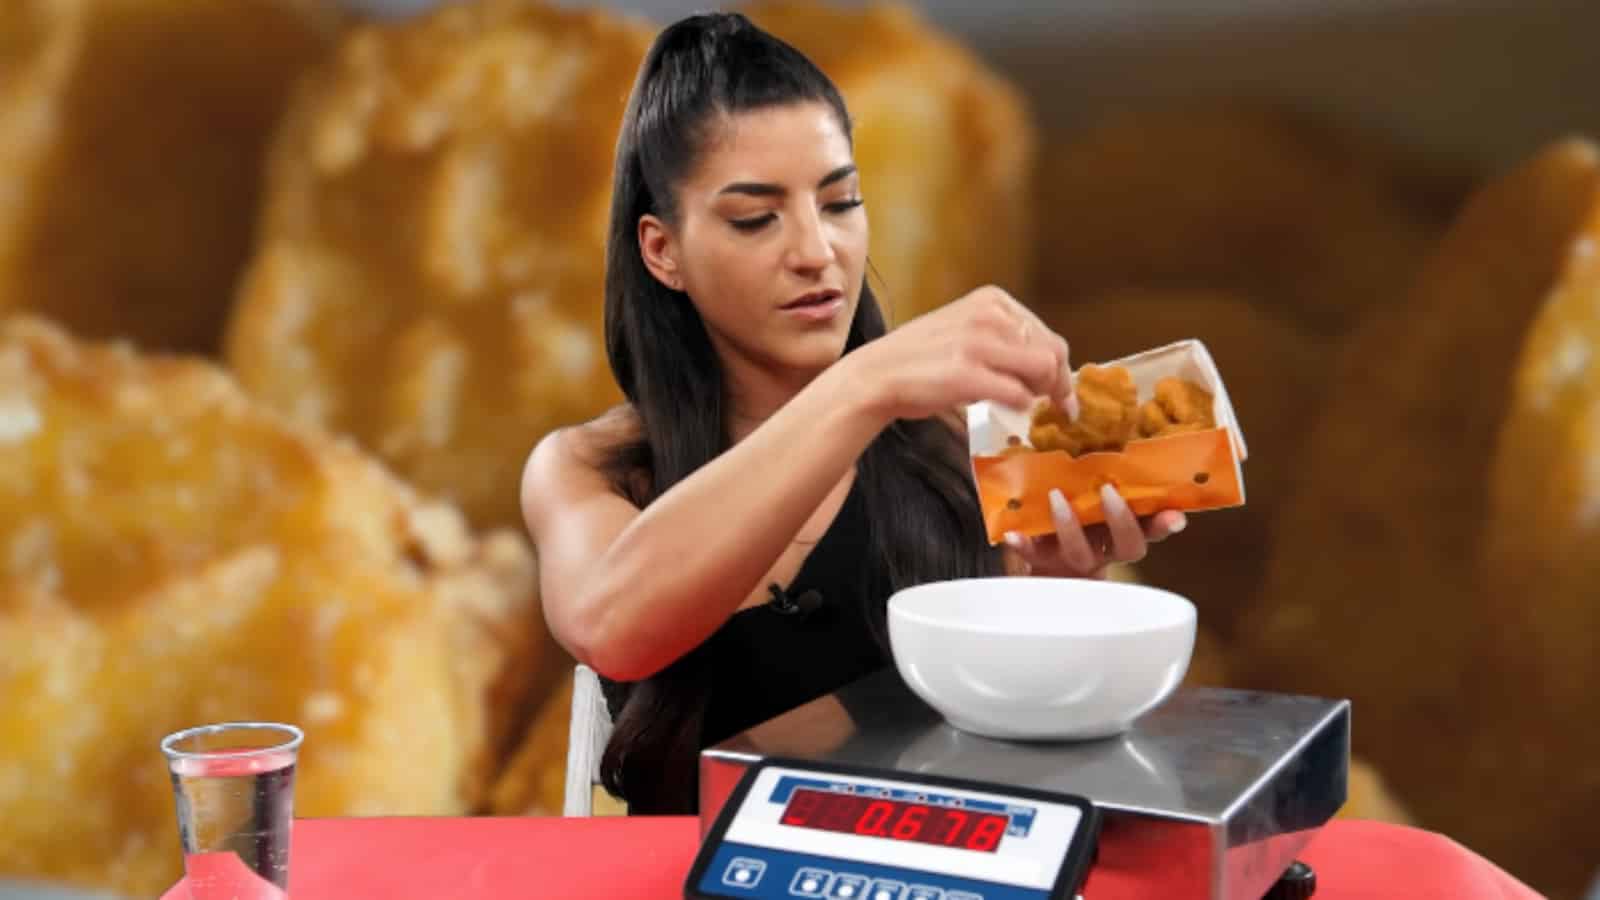 Instagram model sets world record for nuggets